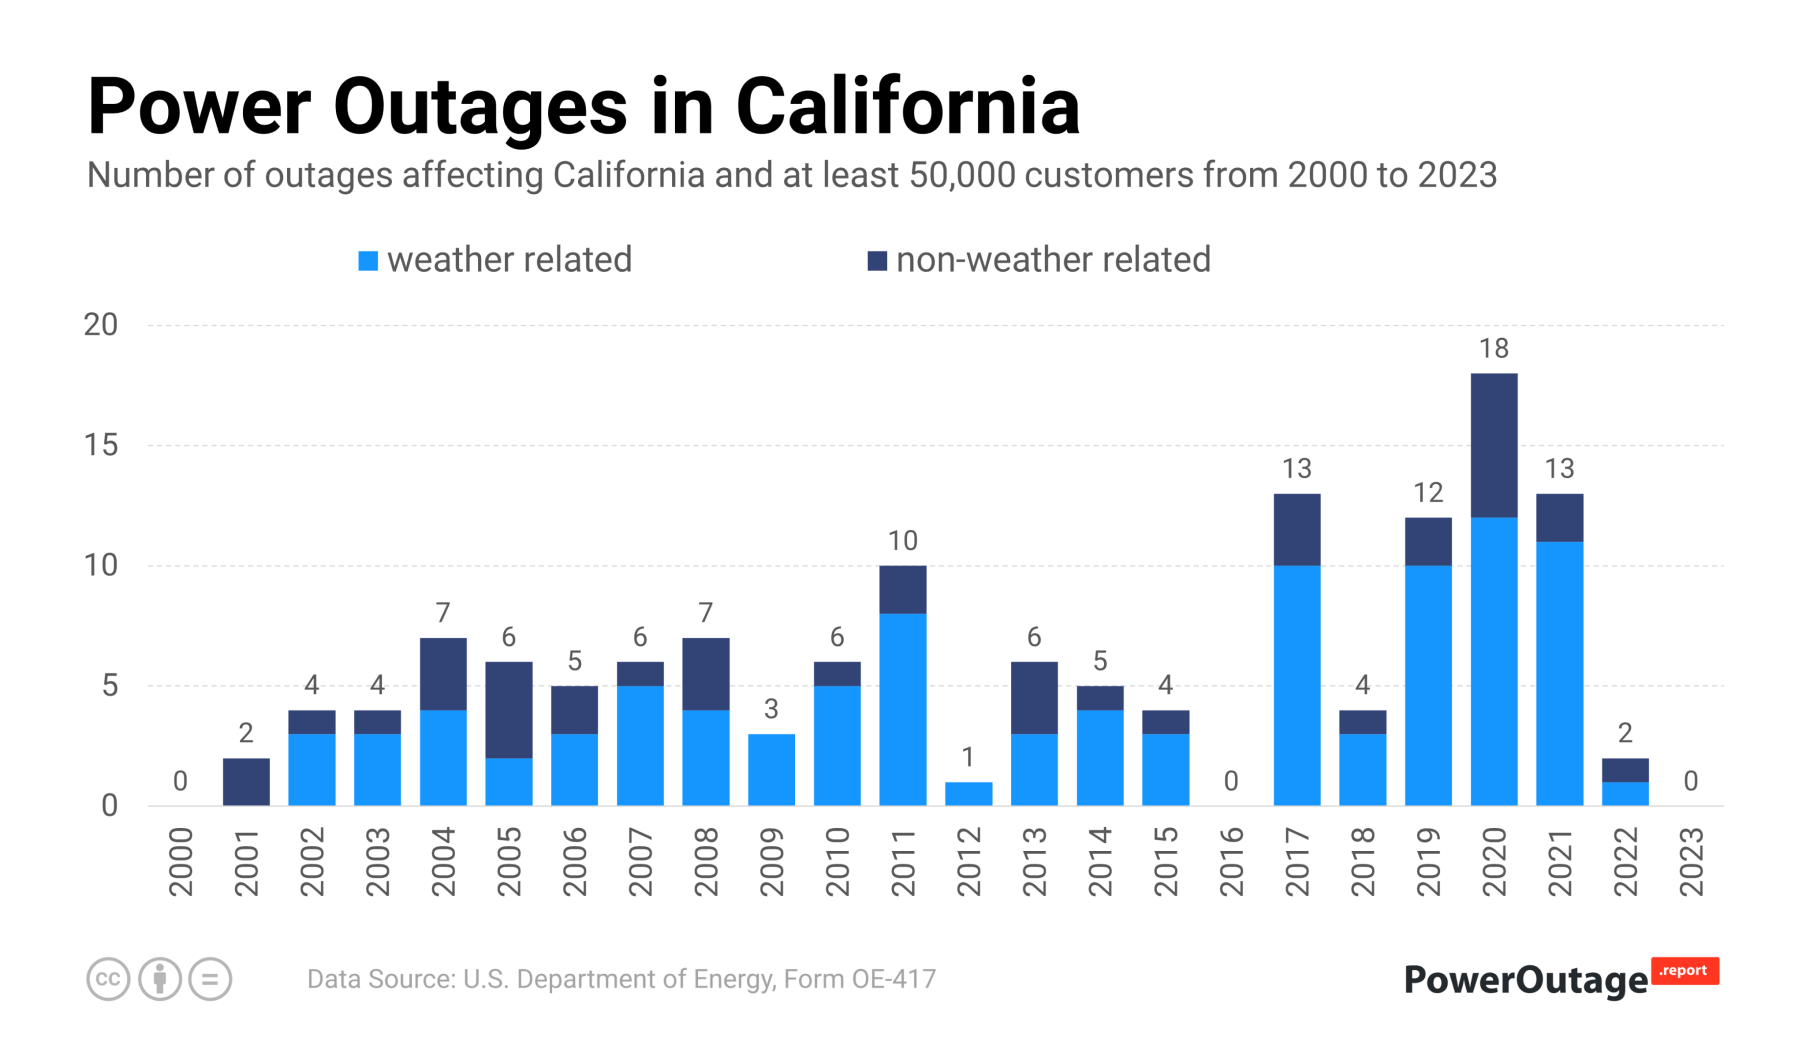 California Power Outage Statistics (2000 - 2022)